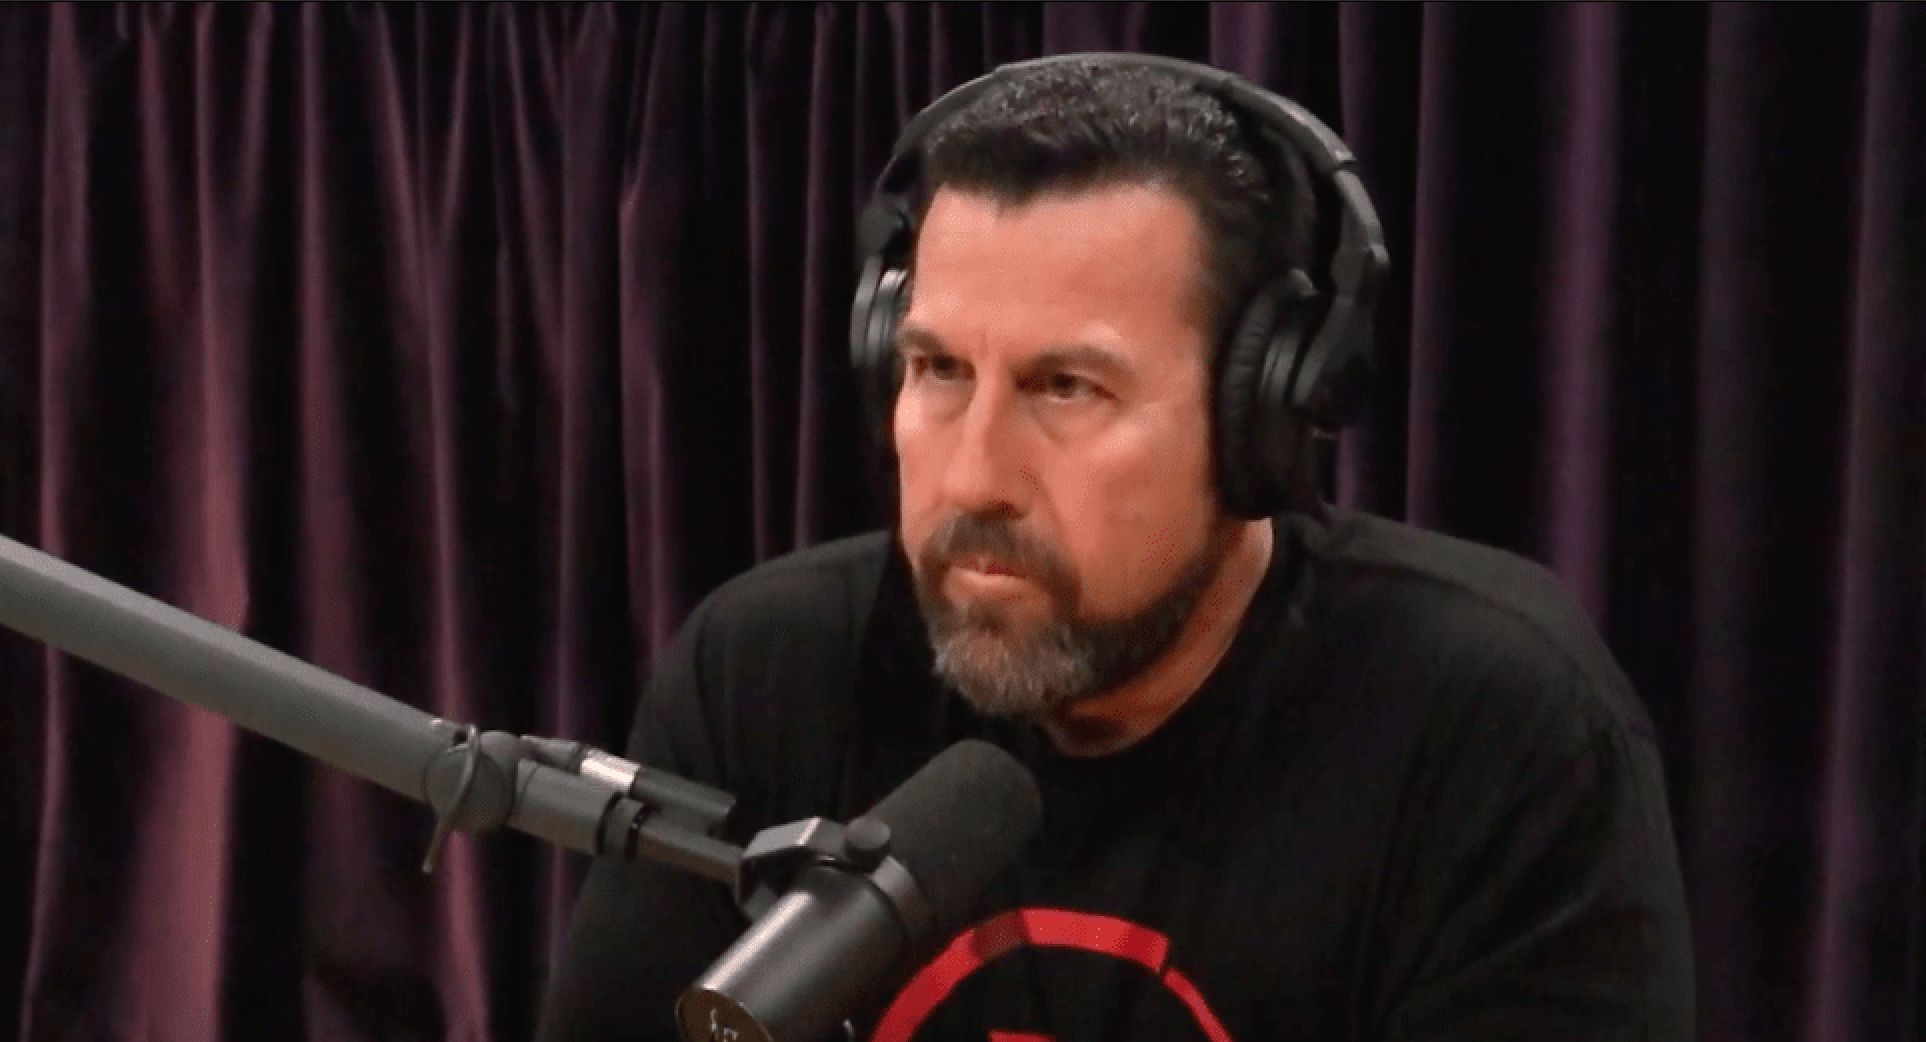 John McCarthy Details An Issue The UFC May Have With The Coronavirus